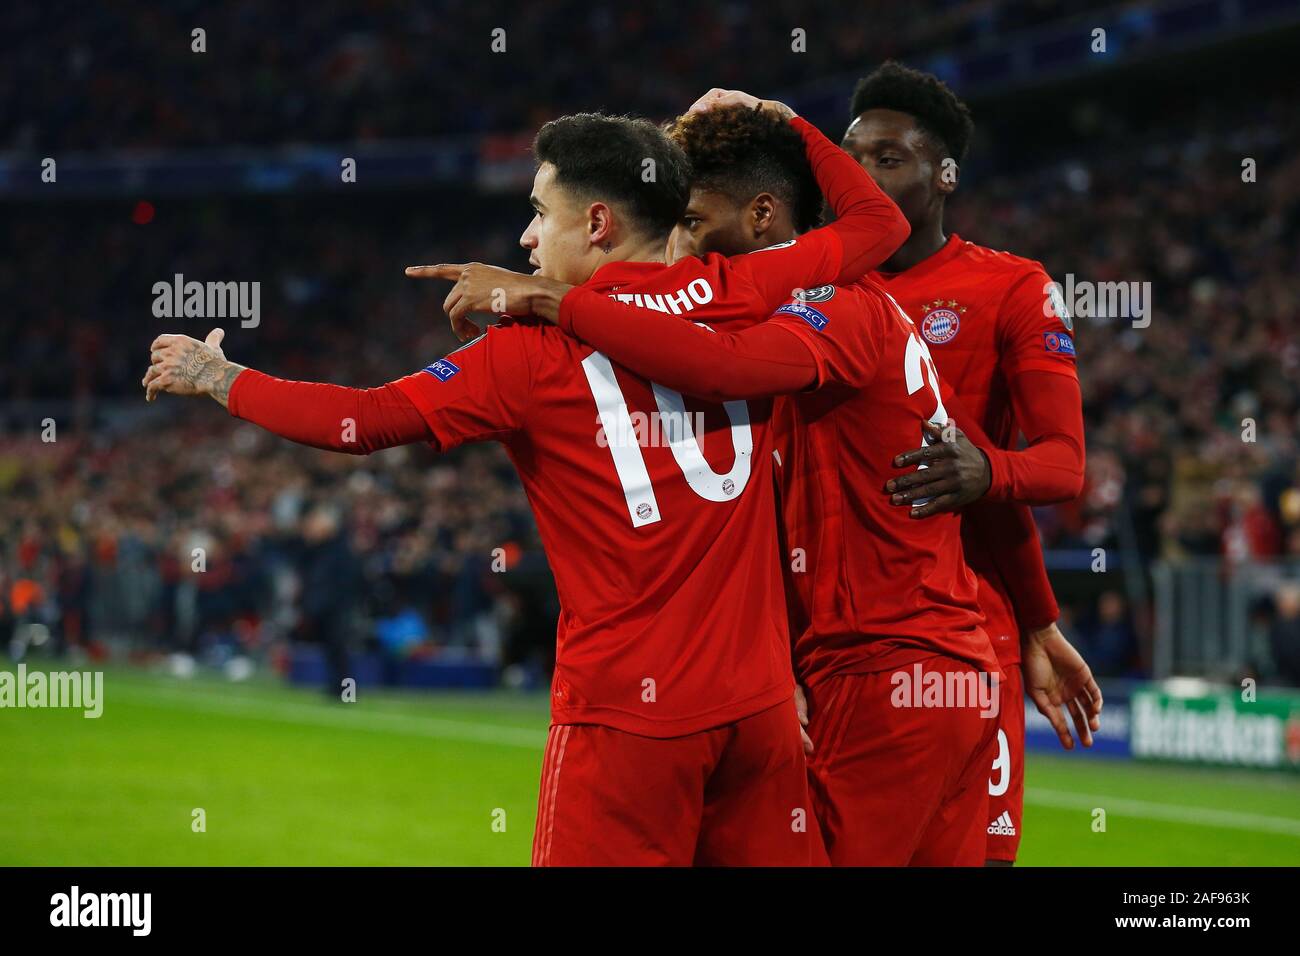 Munich, Germany. 11th Dec, 2019. Bayern Munchen team group (Bayern) Football/Soccer : Bayern Munchen team group celebrate after Coman's goal during UEFA Champions League group stage Matchday 6 Group B match between FC Bayern Munchen 3-1 Tottenham Hotspur FC at the Fussball Arena Munchen in Munich, Germany . Credit: Mutsu Kawamori/AFLO/Alamy Live News Stock Photo